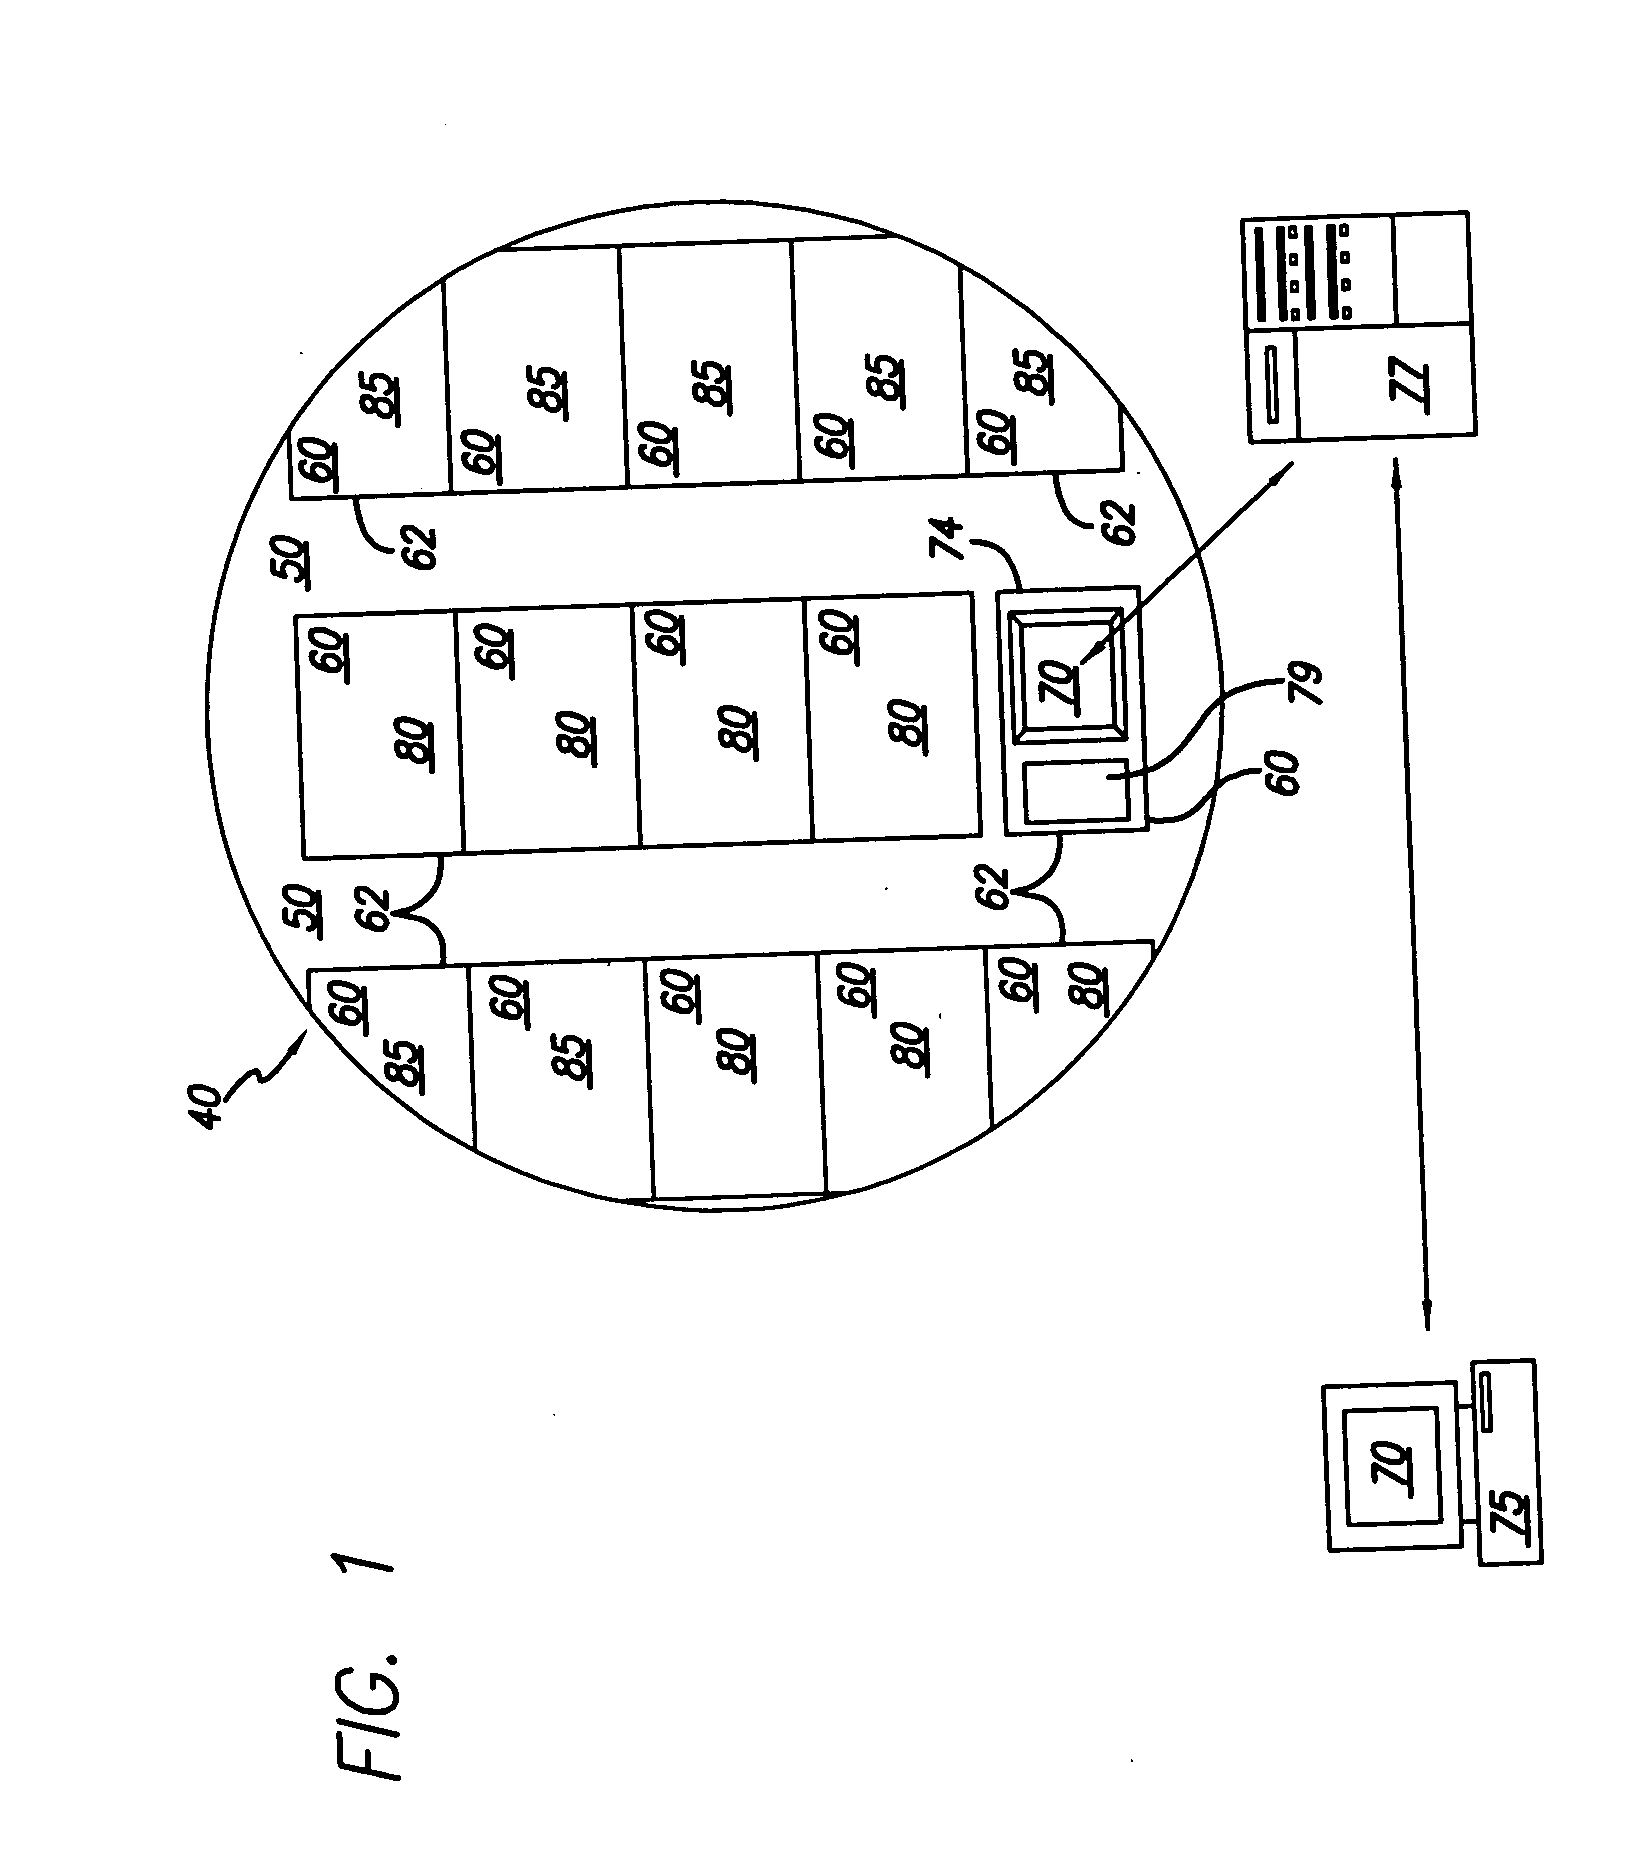 Store with interactive merchandising system and method of operation